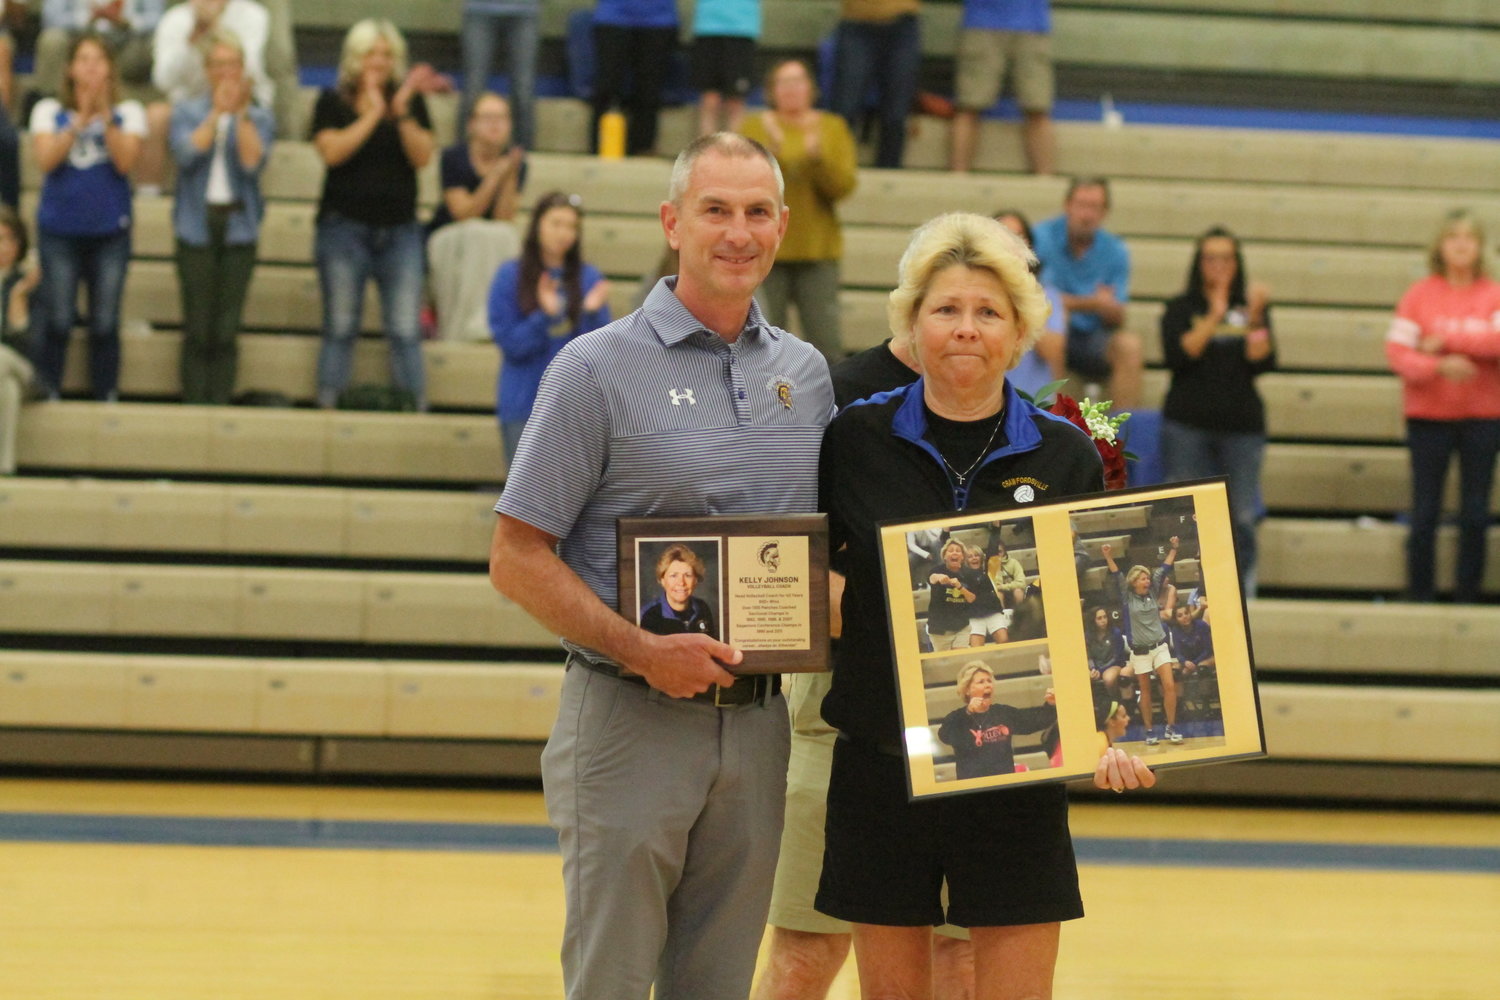 Crawfordsville AD Bryce Barton gives Johnson a ceremonial plaque and photo collage for during the pre-game ceremony for Johnson.